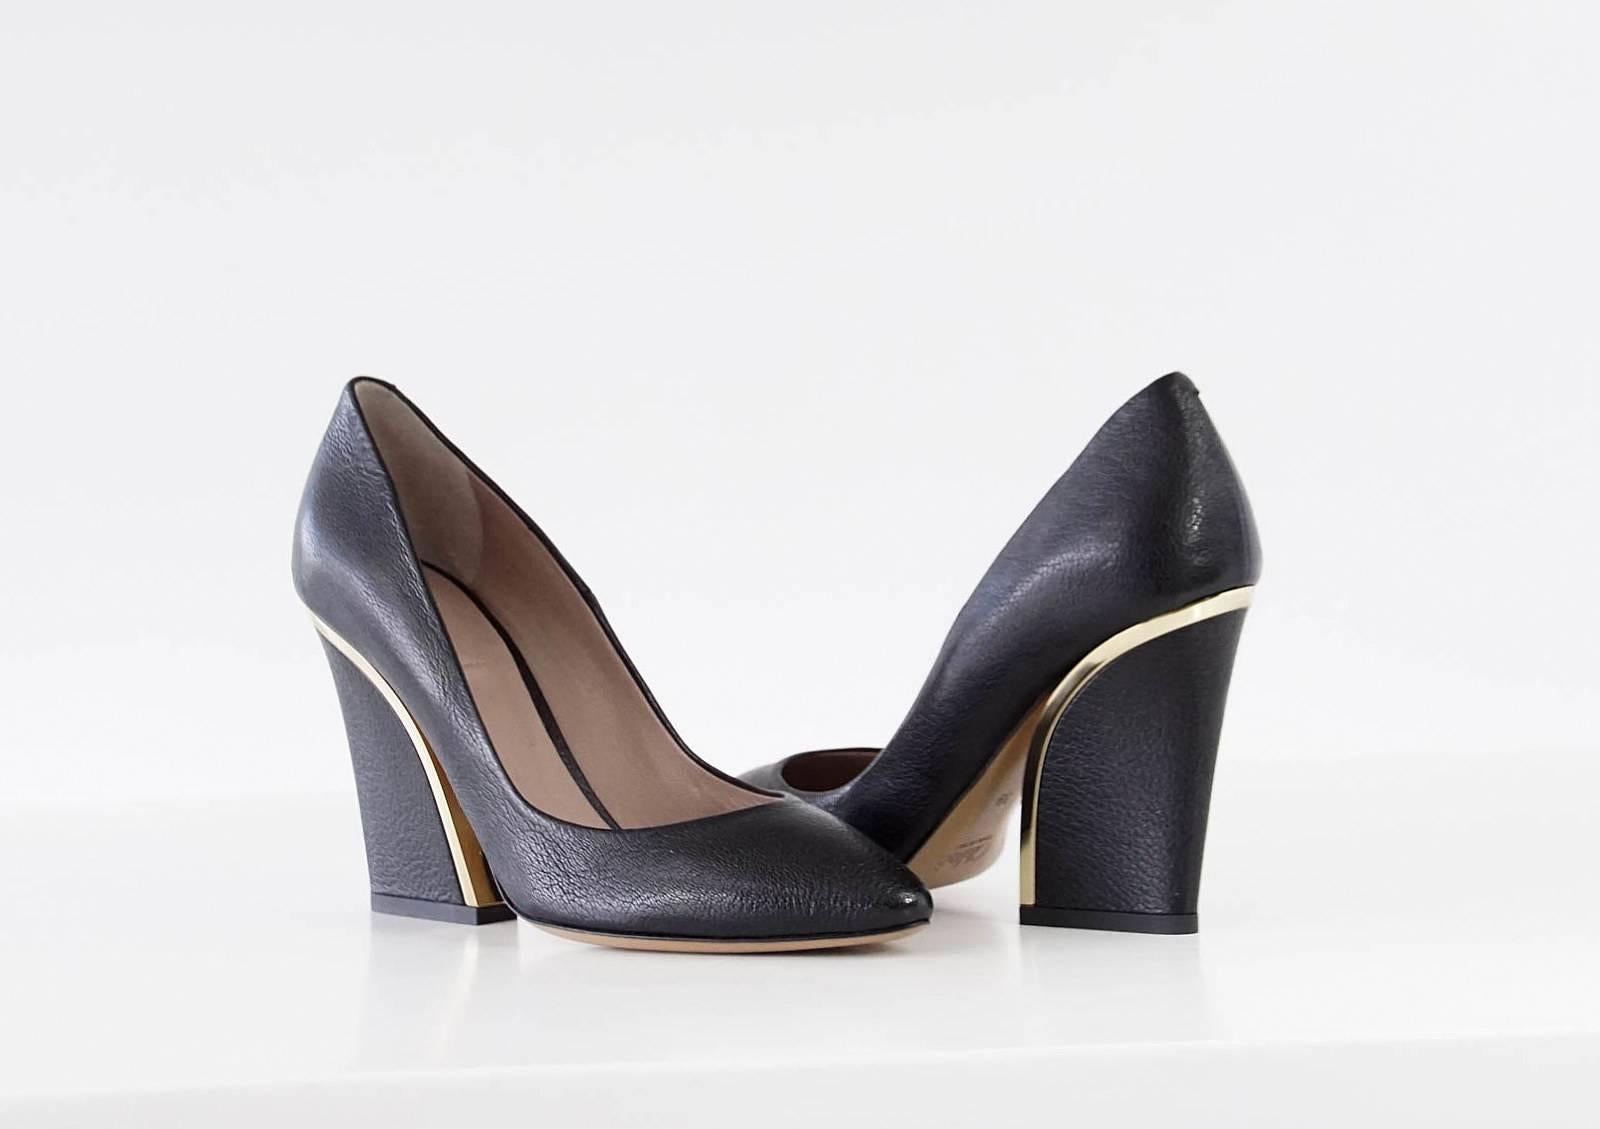 Guaranteed authentic CHLOE beautifully detailed block heel pump. 
Soft black leather with a rounded pointed toe.
Gold trim around the top and side of heel.
Gently rounded toe.
Versatile and wearable.
NEW or NEVER WORN. 
final sale

SIZE 39
USA SIZE